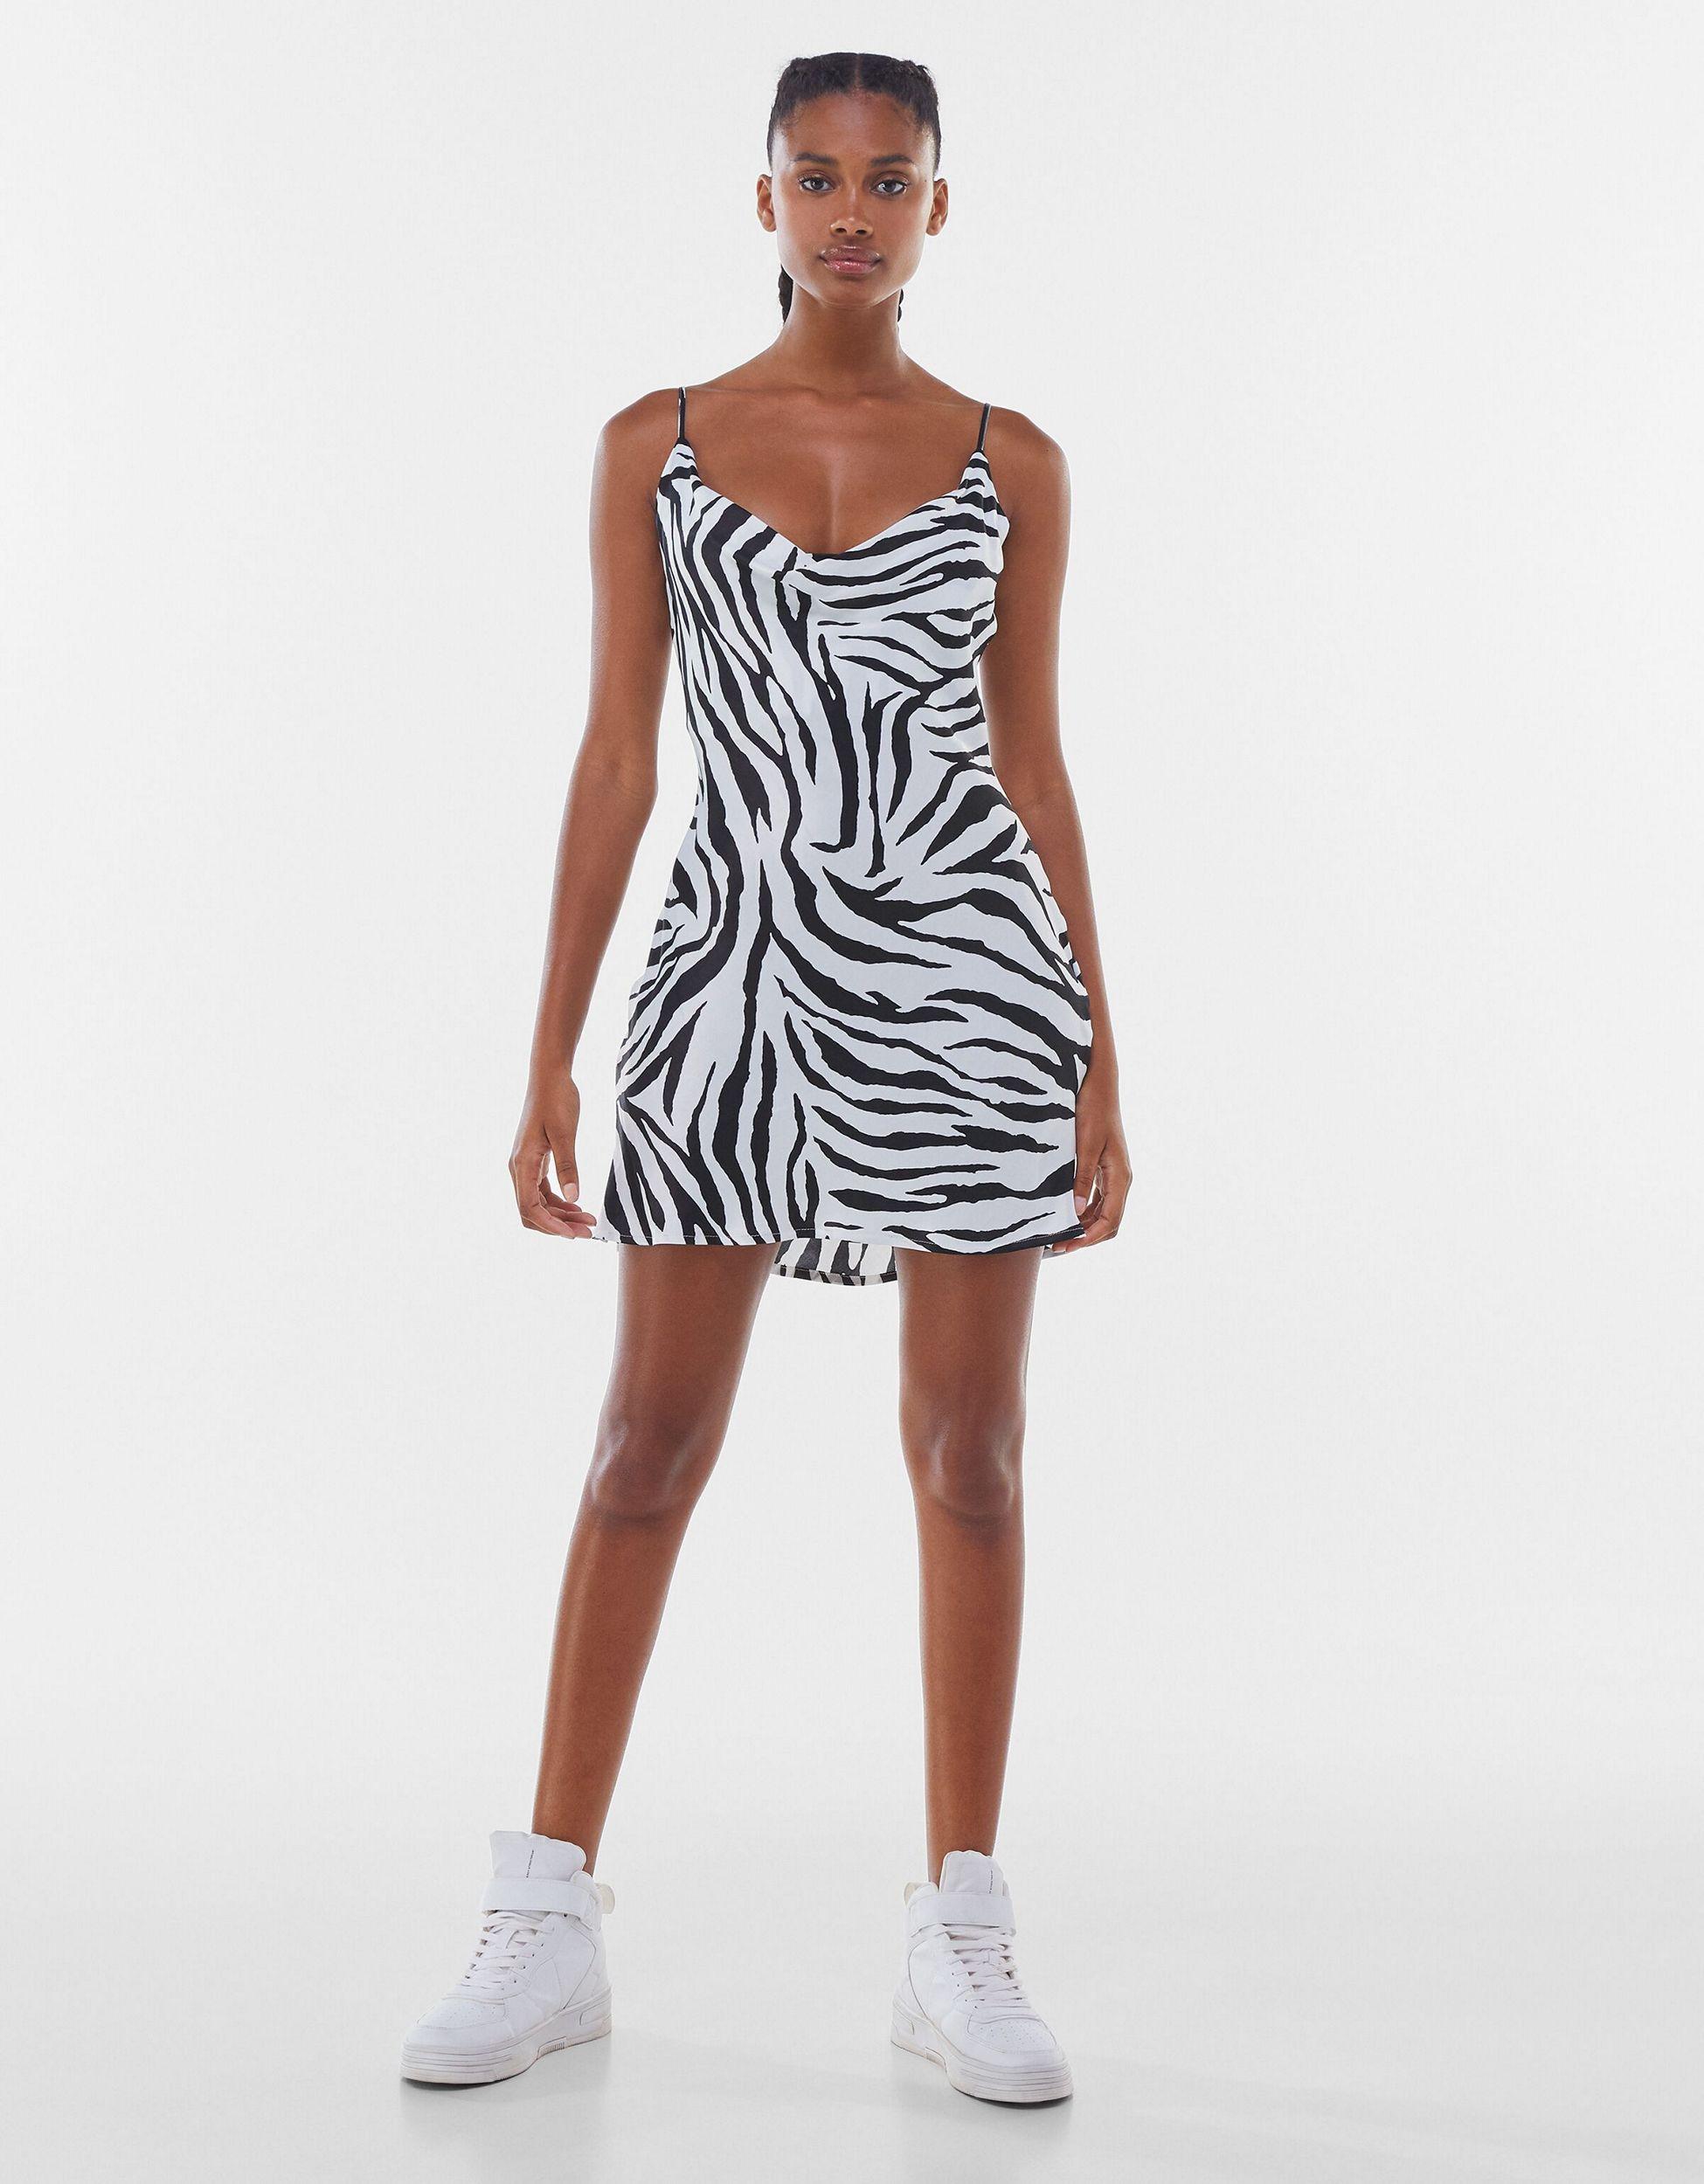 12 Outfits That Prove Zebra Print Is Not a Scary Trend | Dresses with  cowboy boots, Cowboy boot outfits, Dress with boots